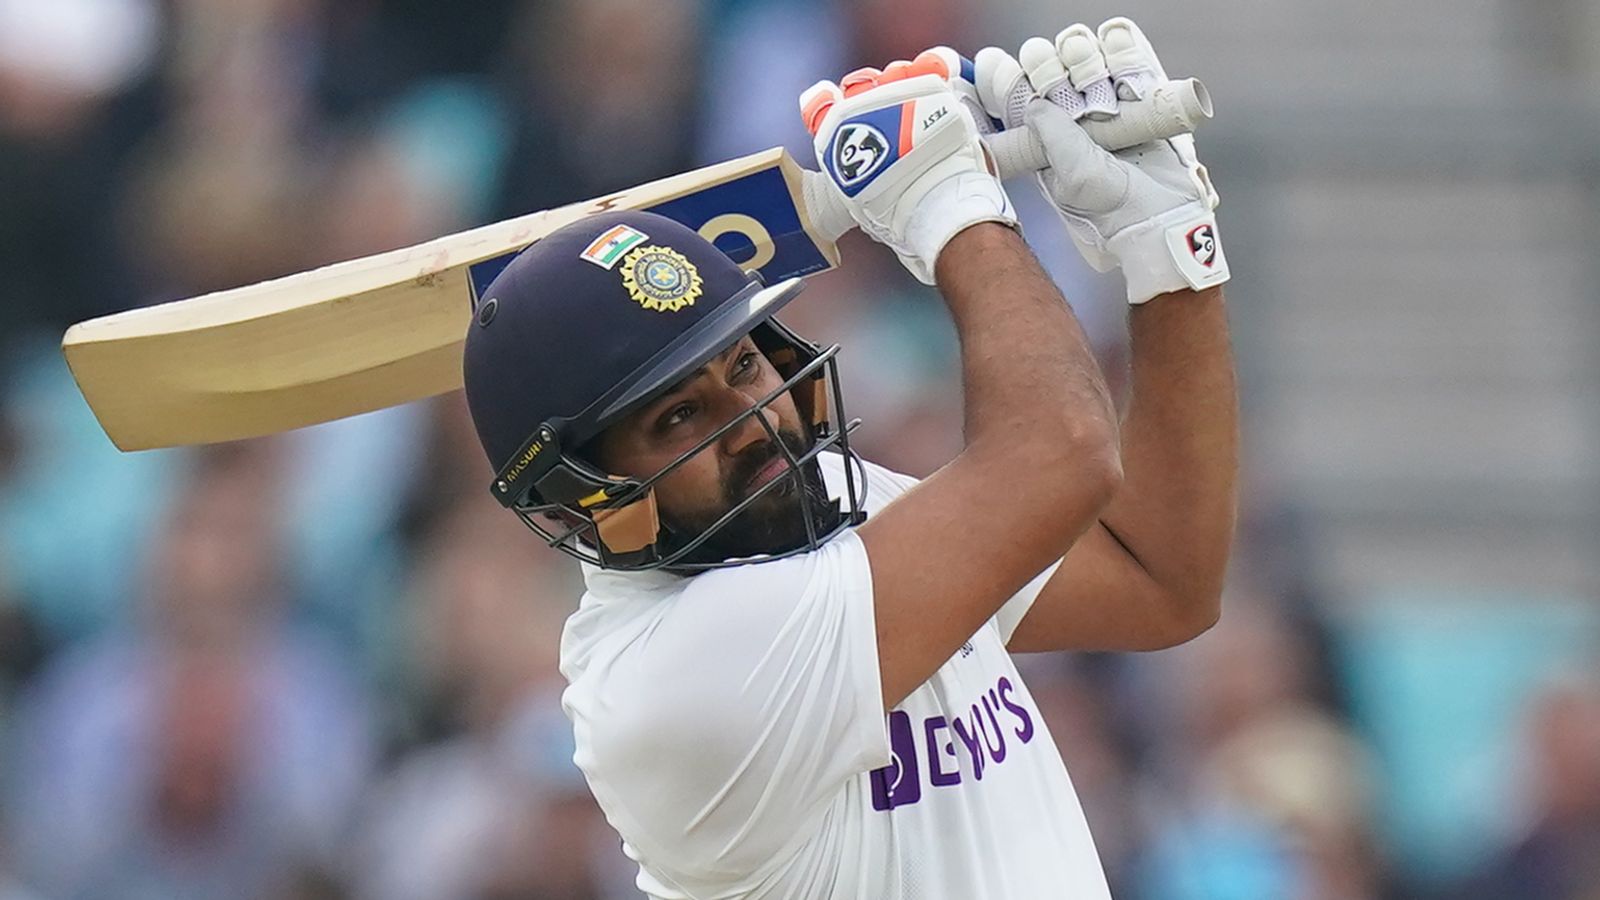 India captain Rohit Sharma doubtful for England Test after testing positive for Covid-19